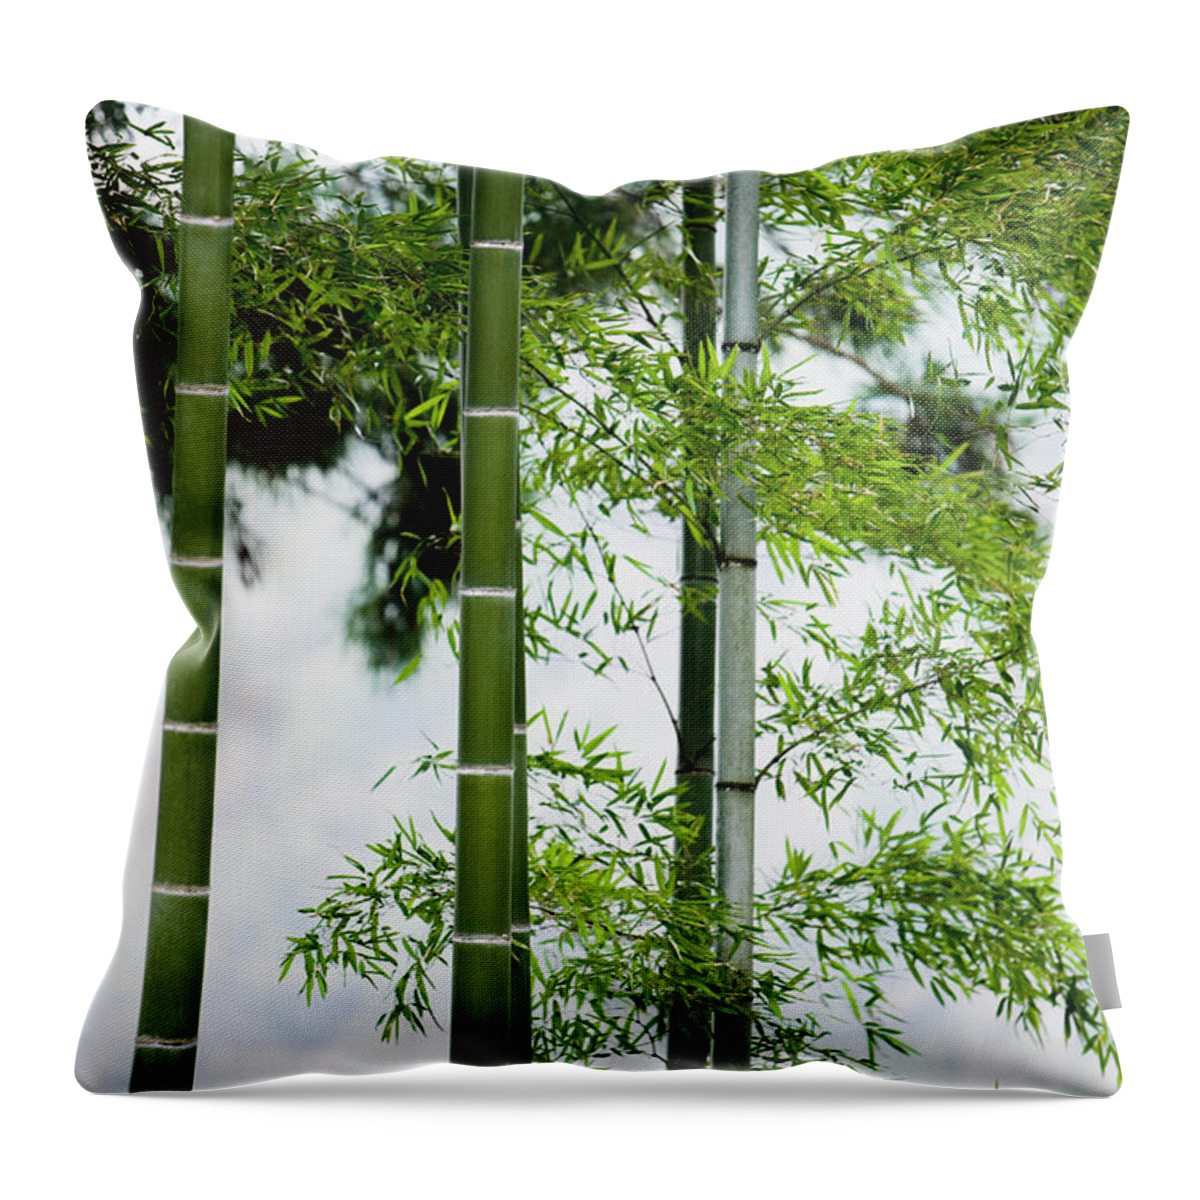 Bamboo Throw Pillow featuring the photograph Bamboo by Mixa